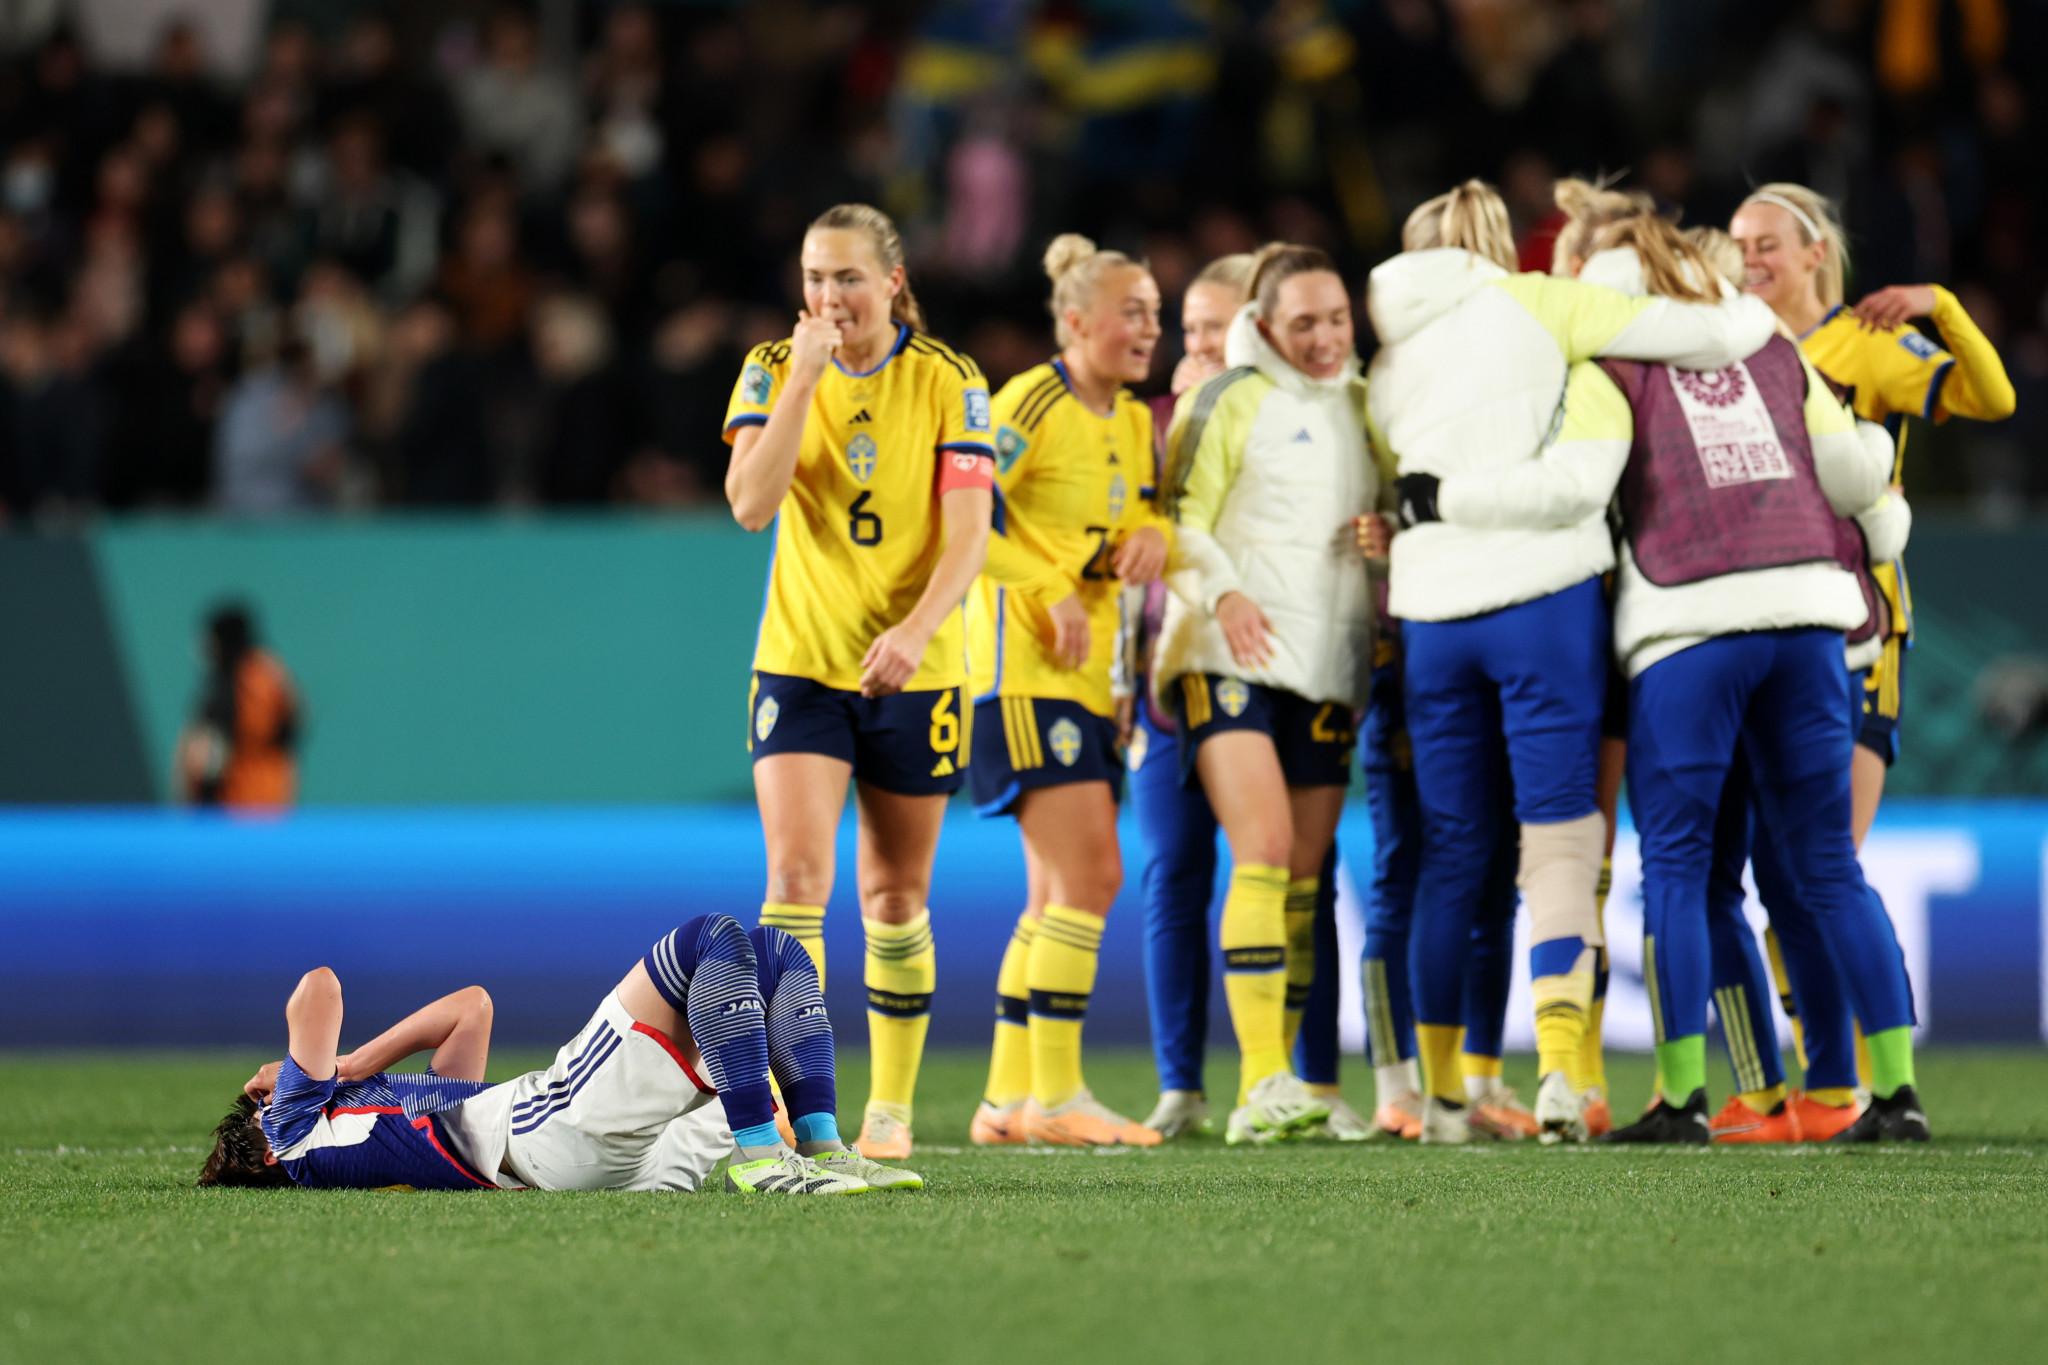 Three-time bronze medallists Sweden then beat the 2011 champions Japan 2-1 at Eden Park in Auckland despite the latter being seen as title contenders ©Getty Images